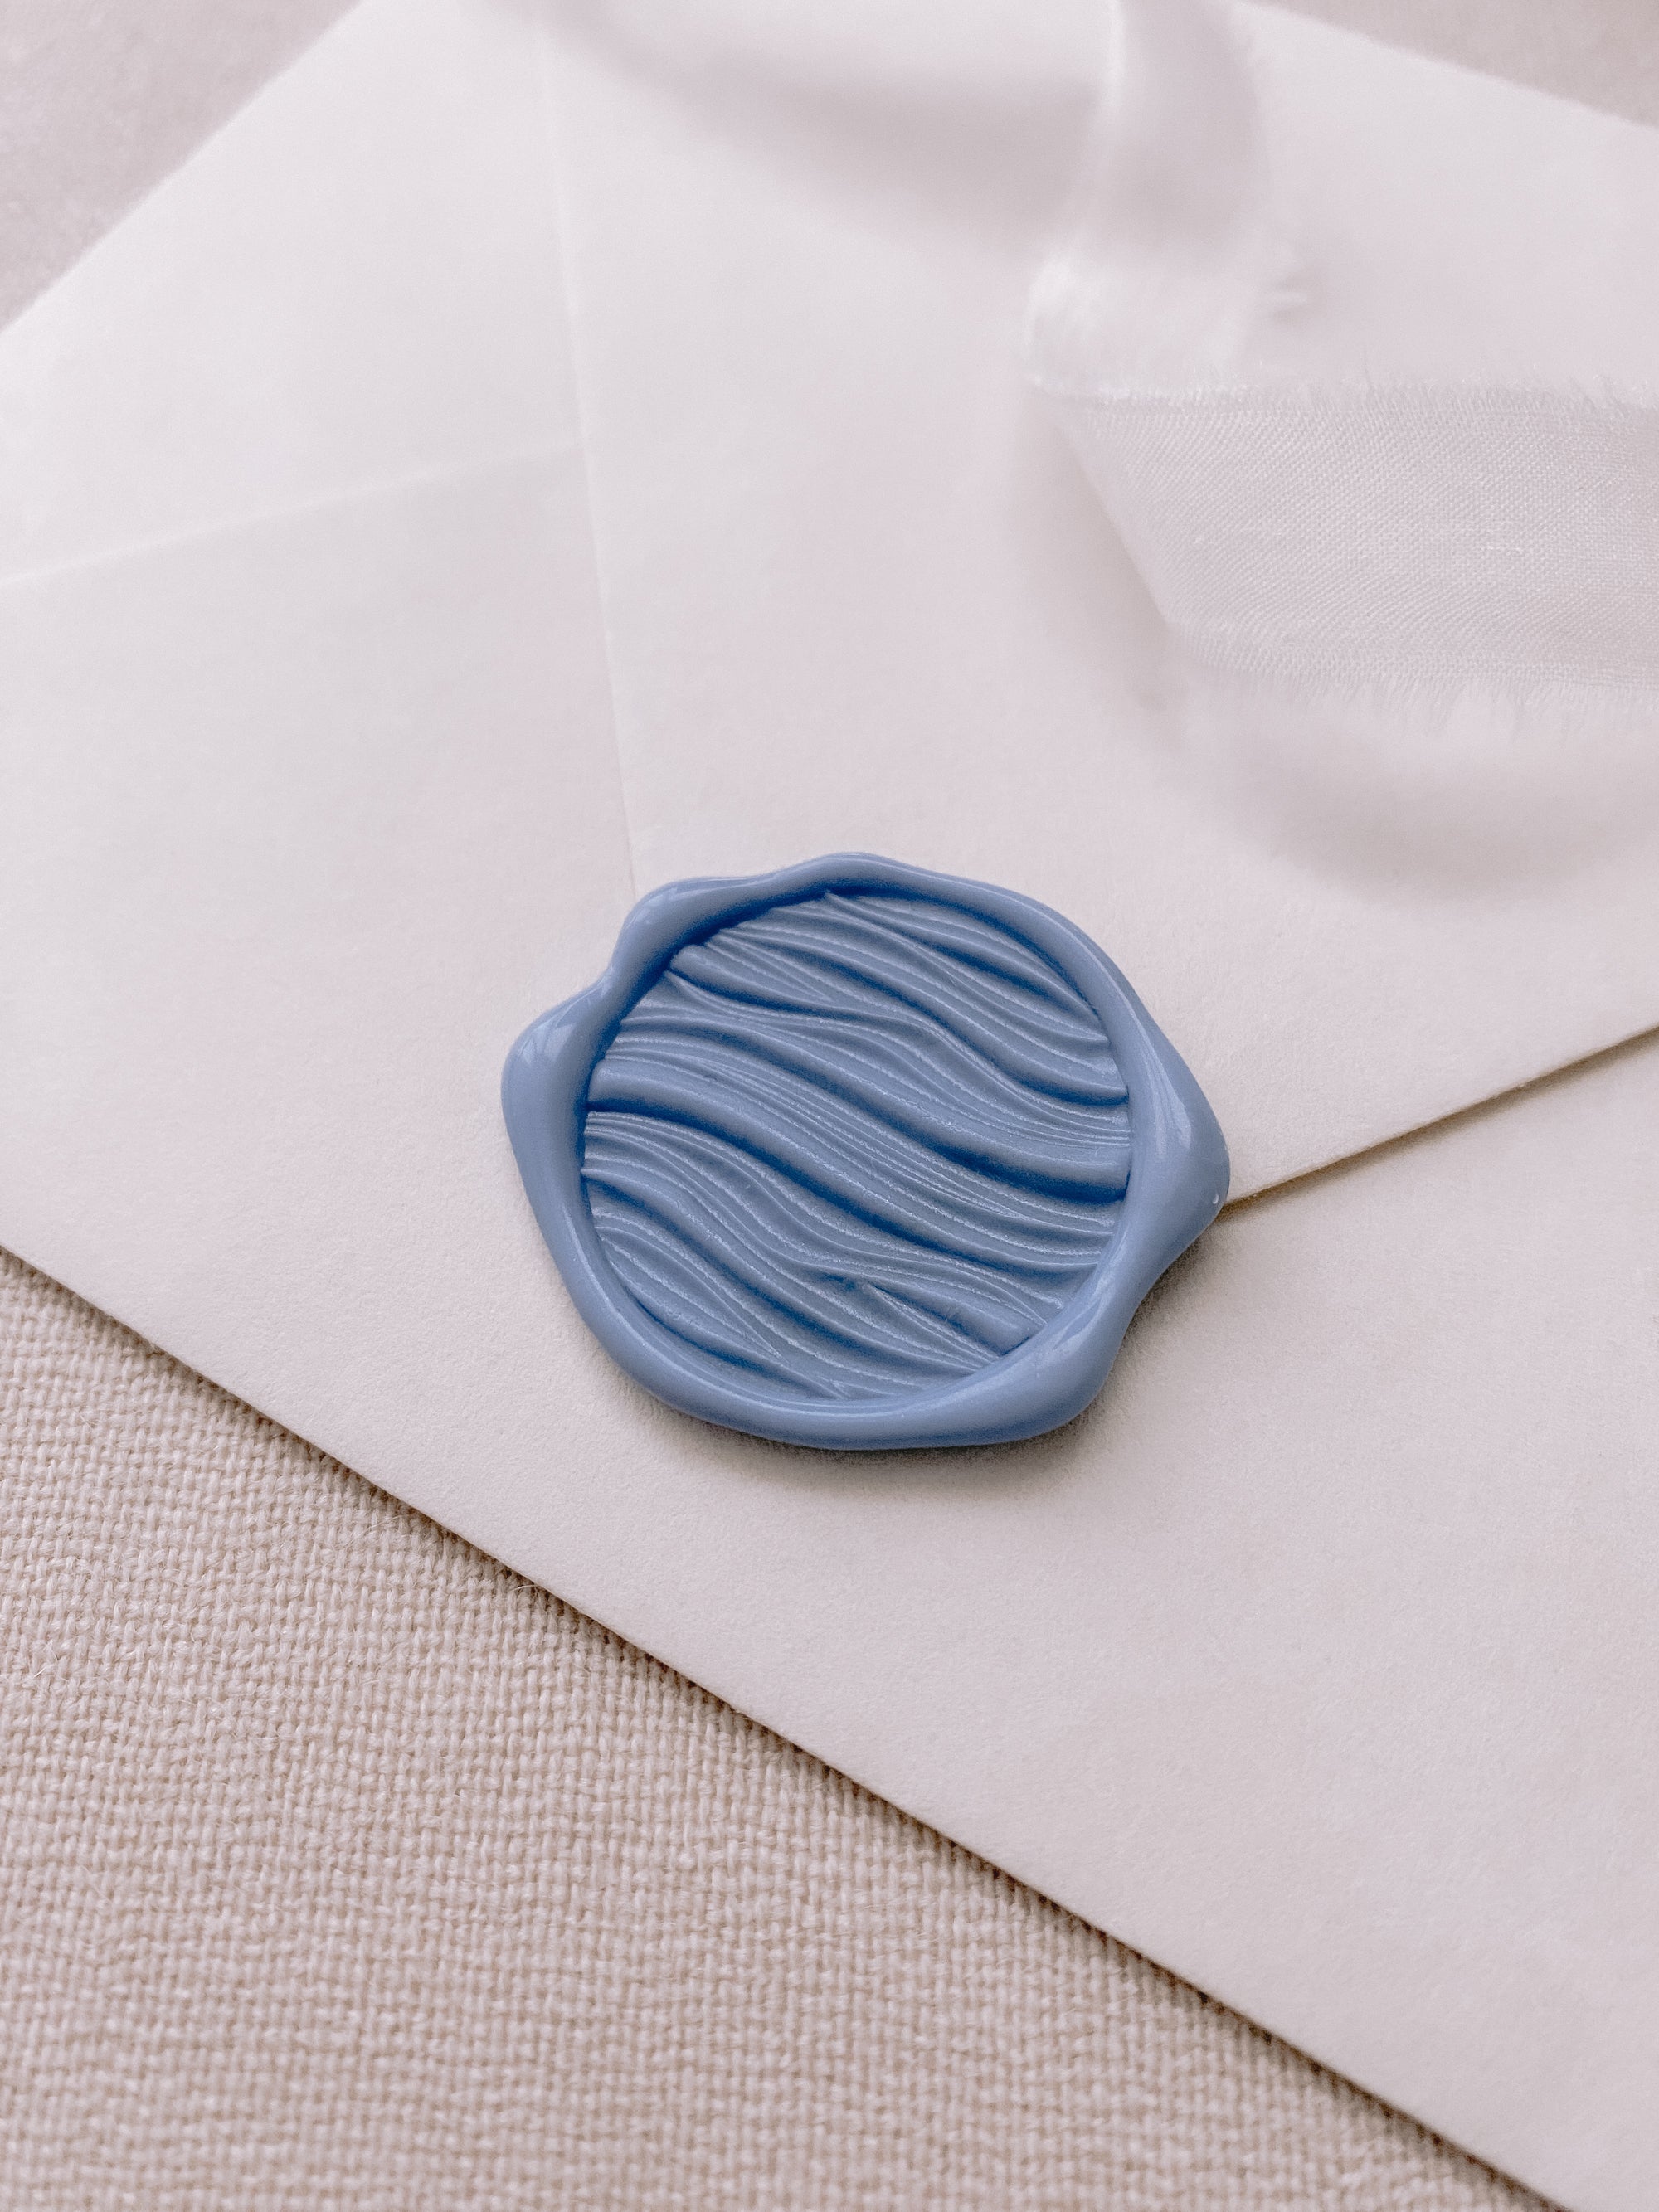 Sea Wave Wax Seal Stamp Heads Wedding Decorative Sealing Stamps Separated  Wooden